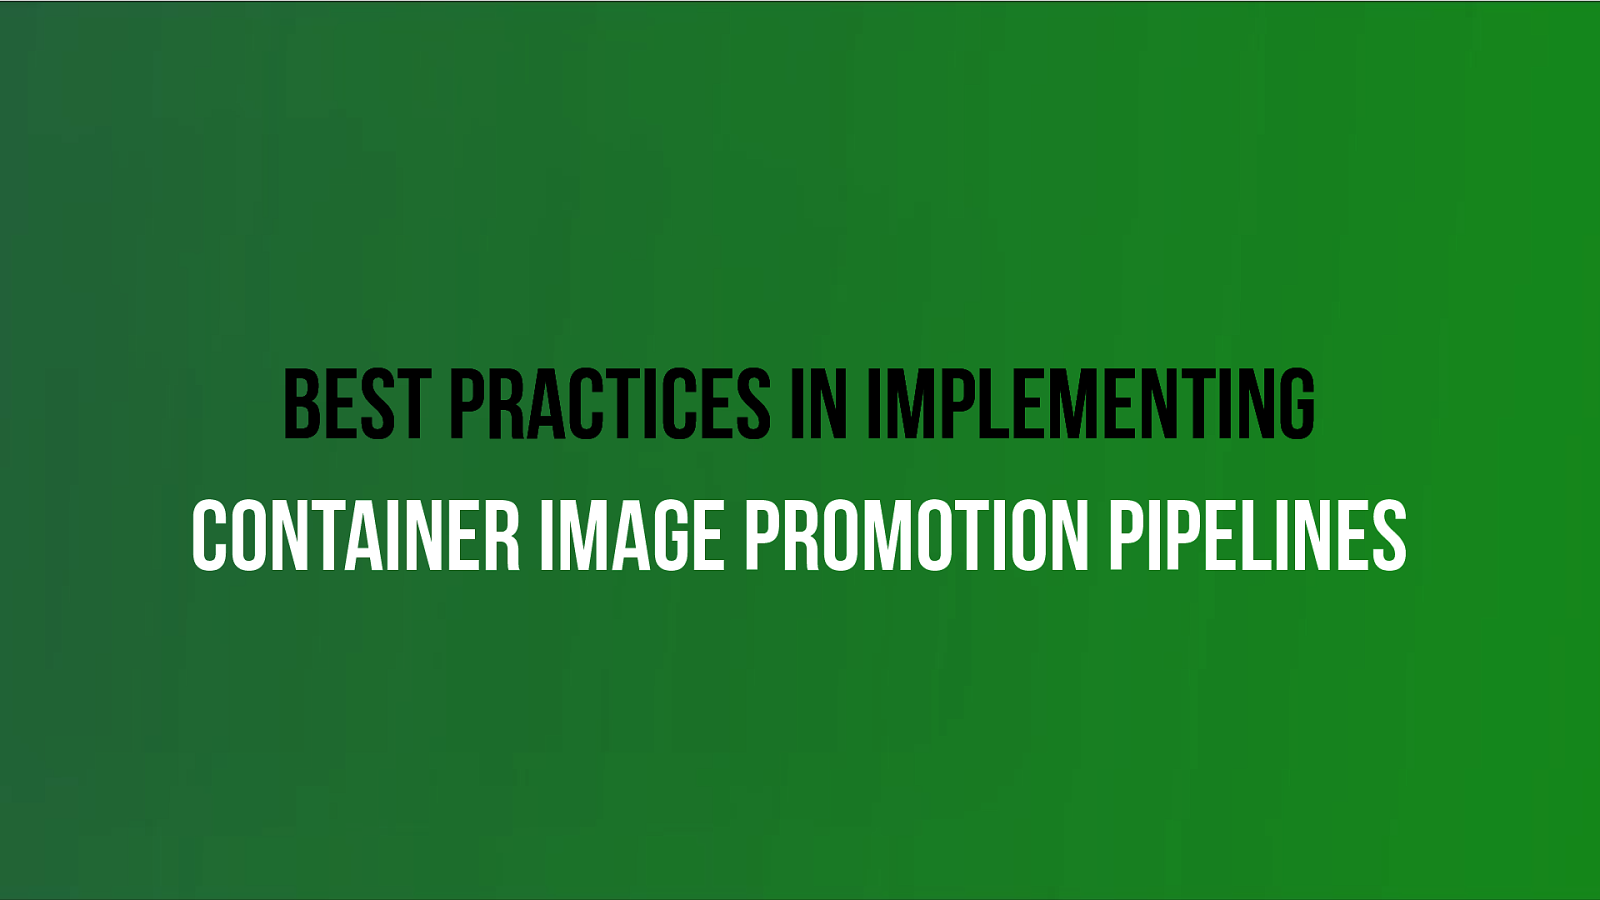 Best Practices In Implementing Container Image Promotion Pipelines